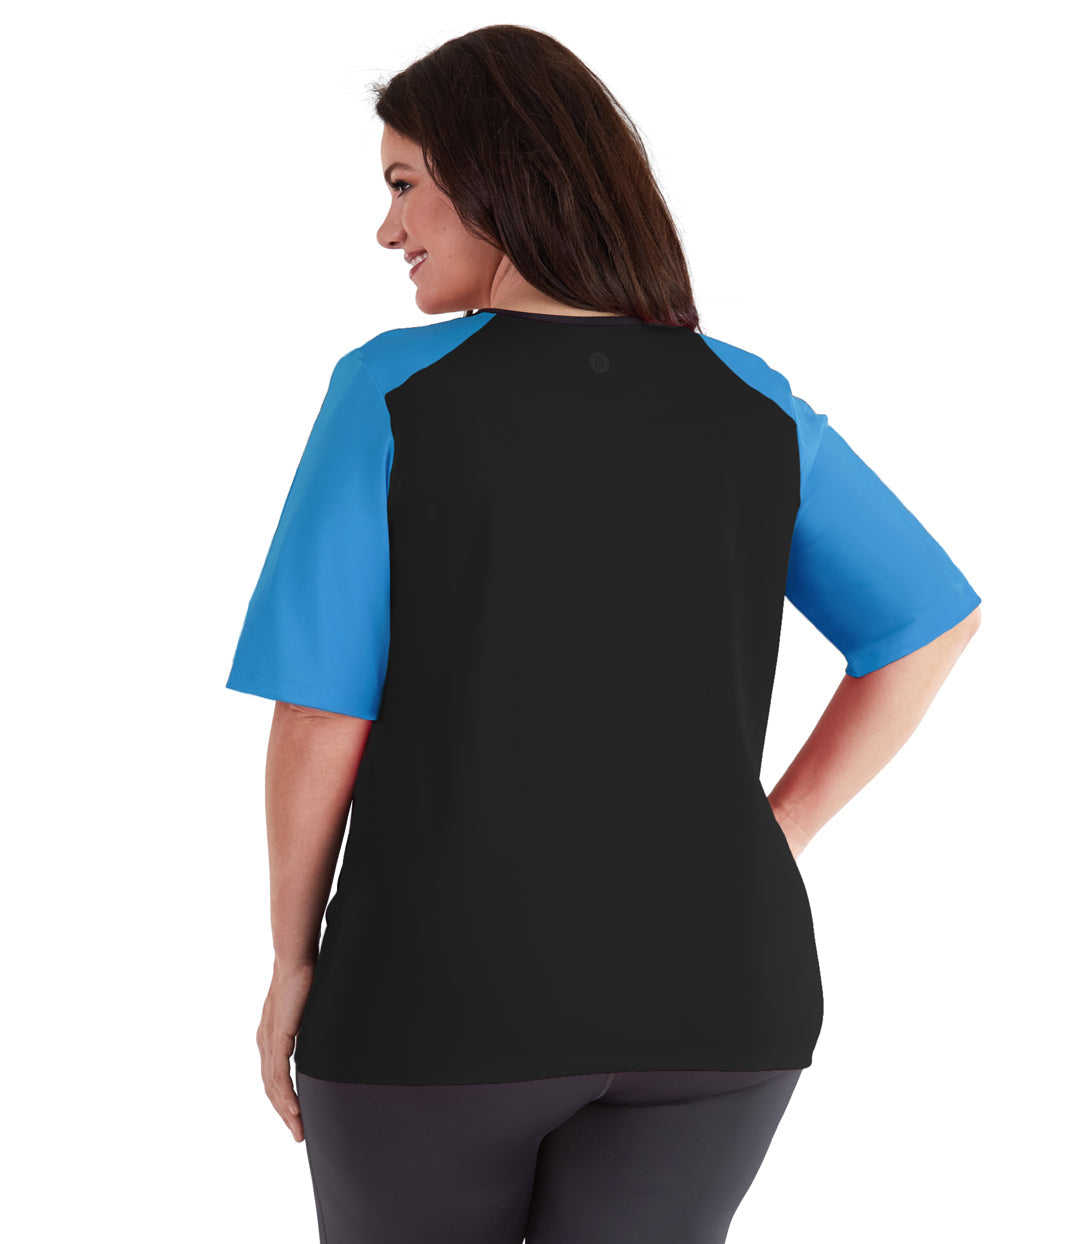 Plus size woman, facing back, wearing JunoActive's Swim and Beach Short Sleeve top. The back panel is black with turquoise shoulder and sleeves. The sleeved end at the woman's elbows.